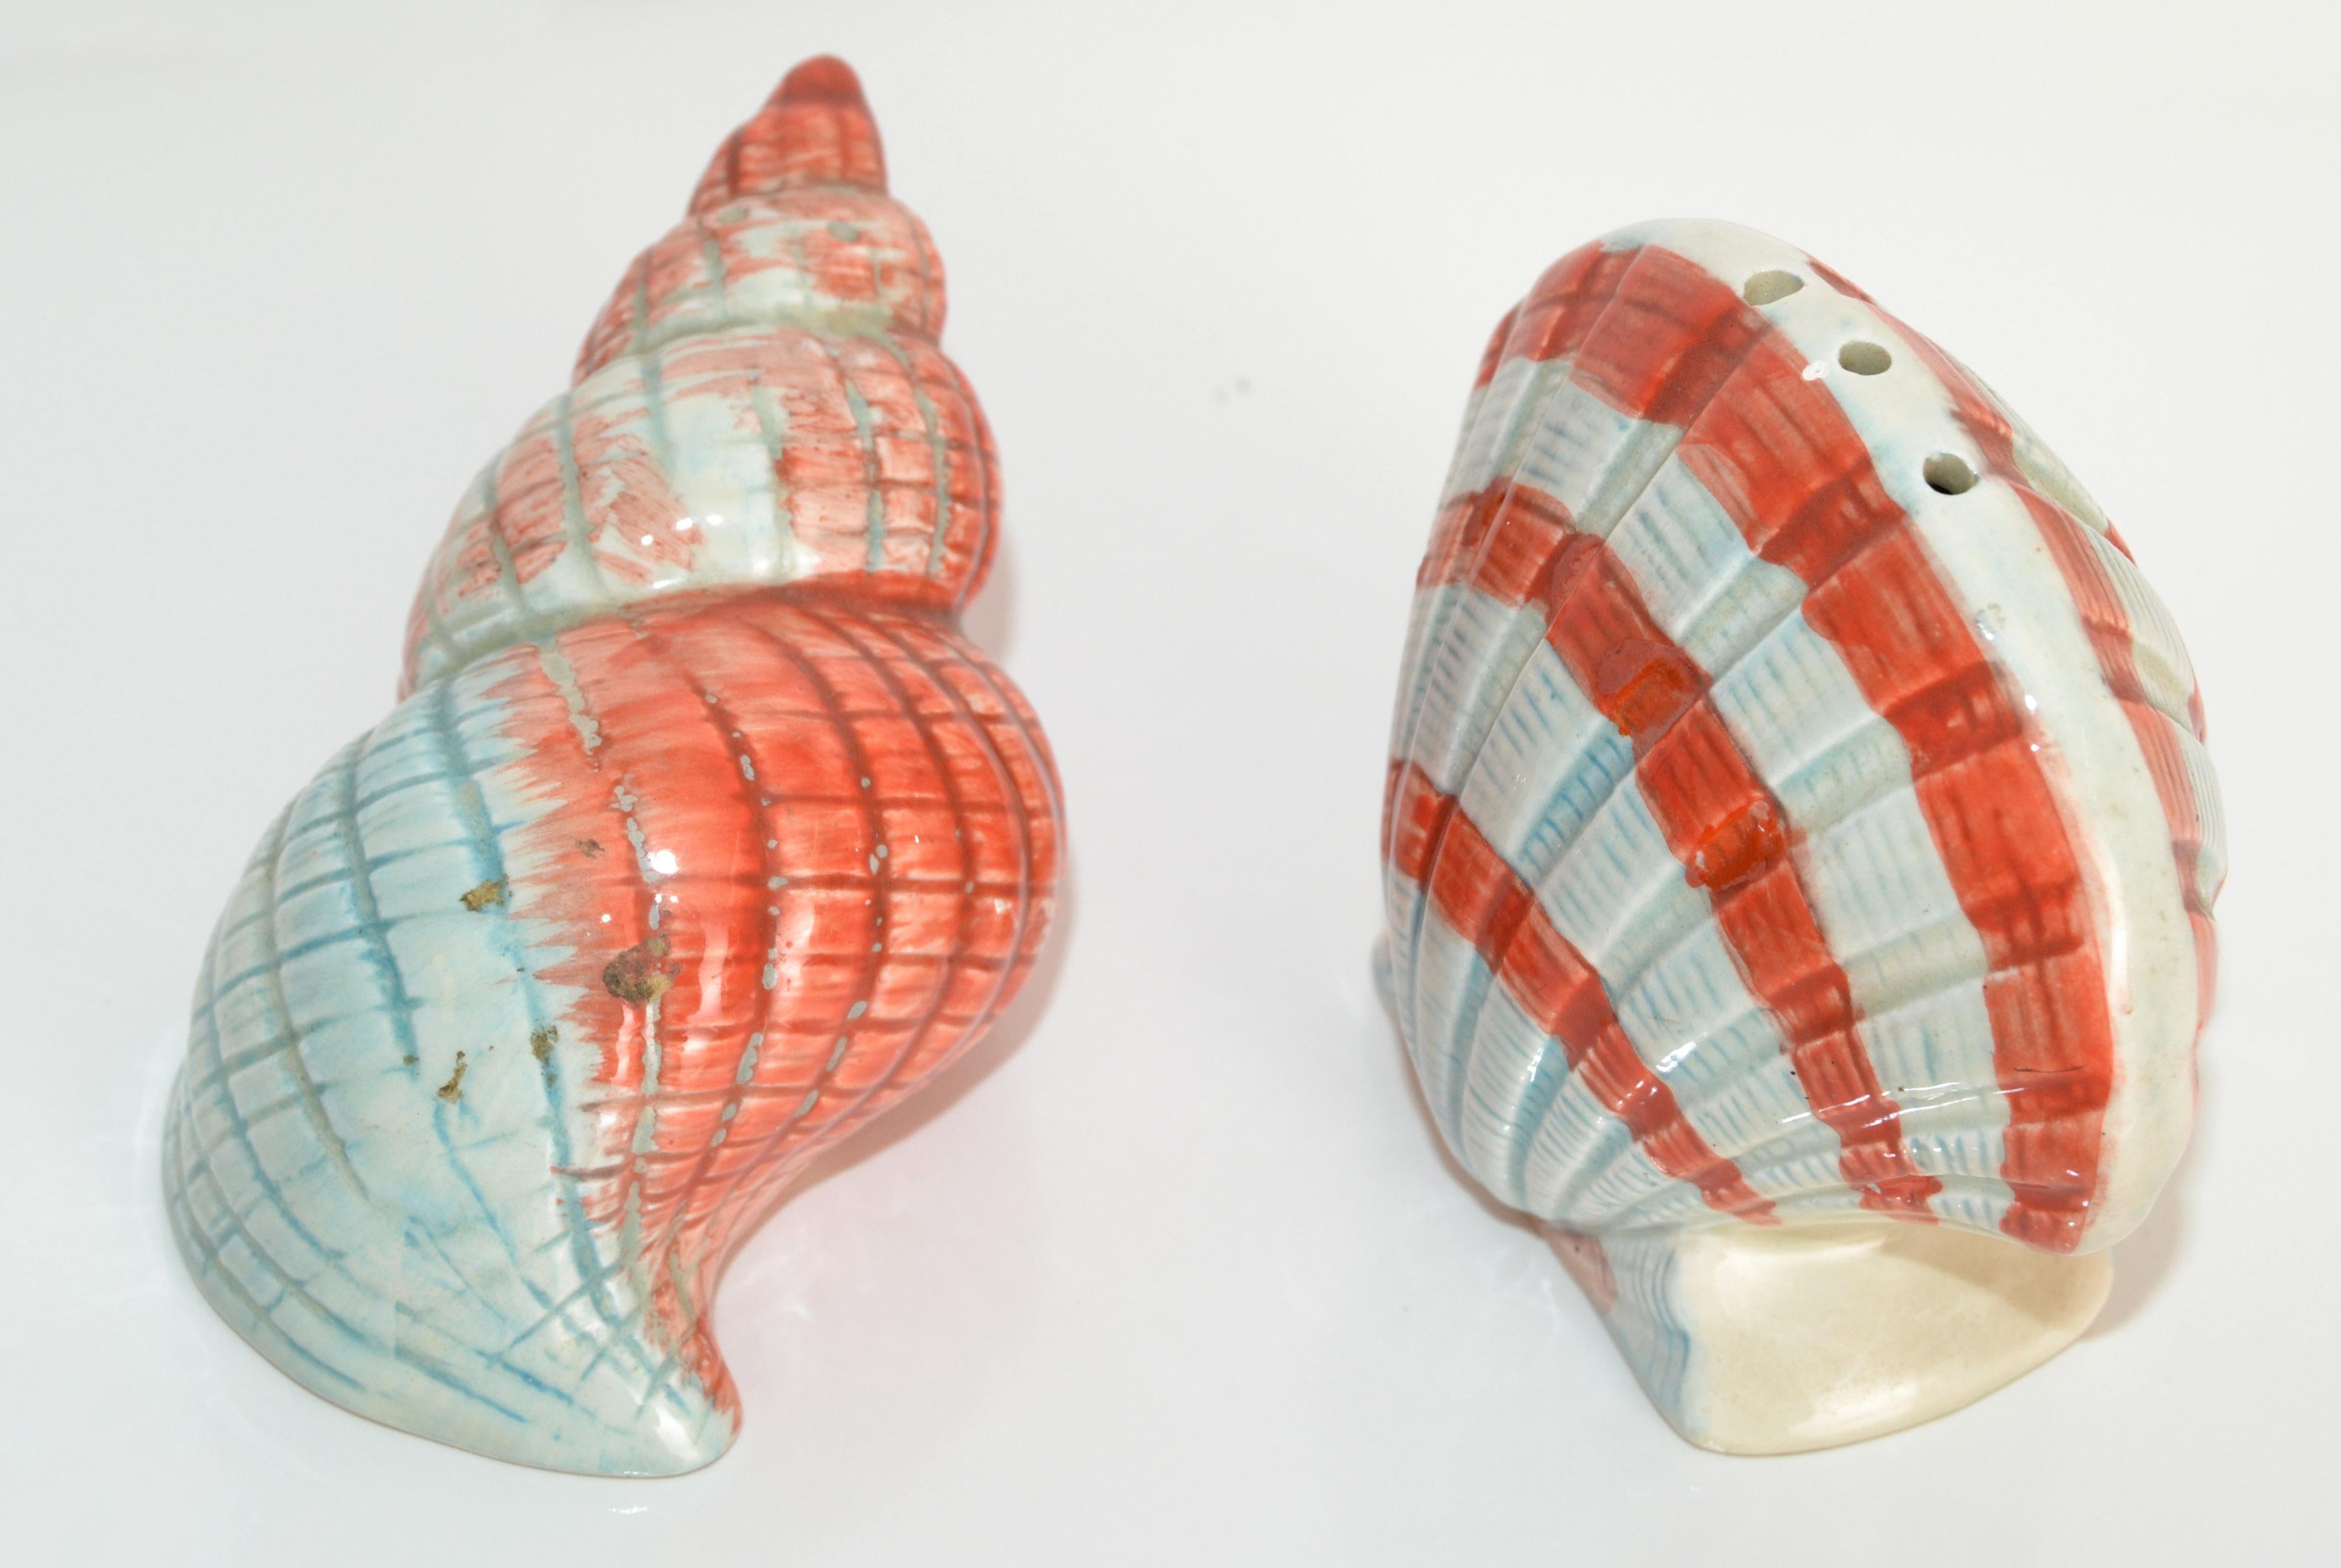 Hand-Crafted Vintage Hand-Painted Ceramic Nautical Seashell Salt & Pepper Shakers Collectible For Sale